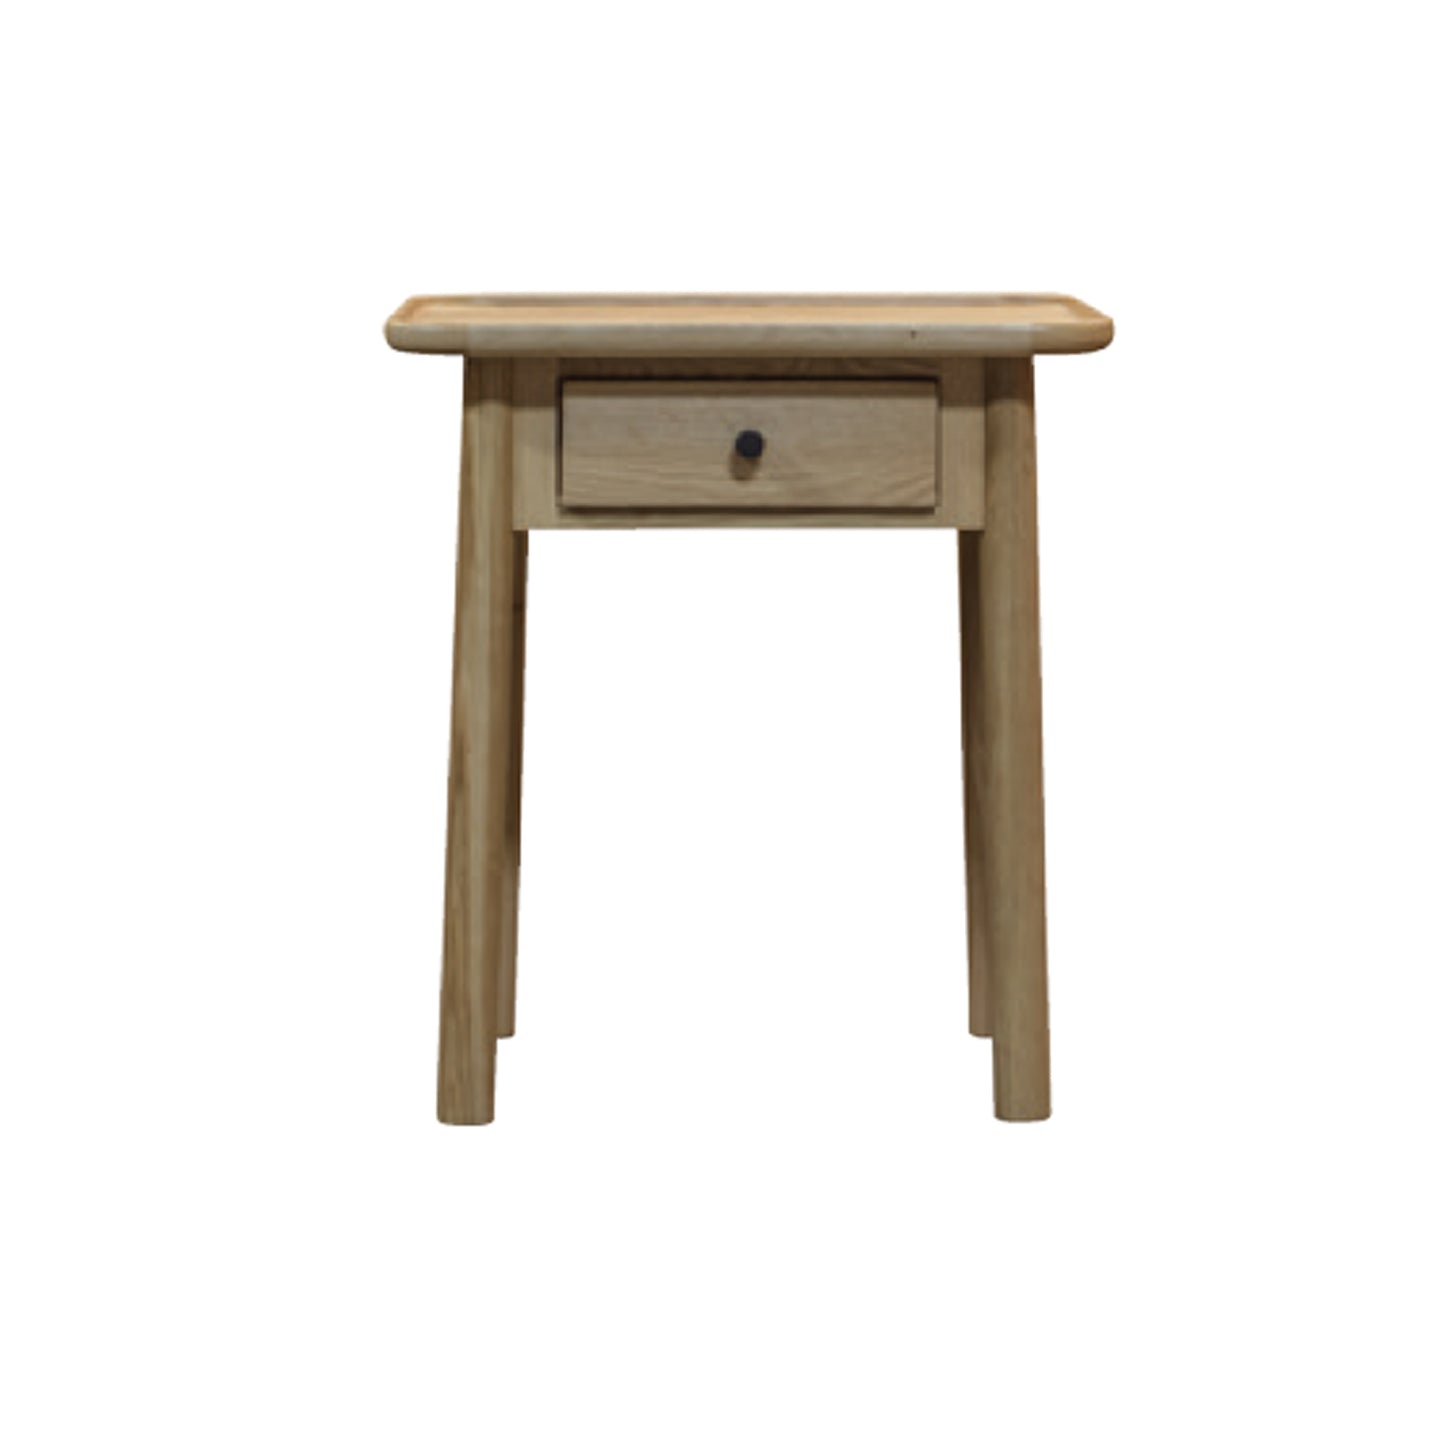 A small Wembury 1 Drawer Side Table with a drawer for home furniture or interior decor.